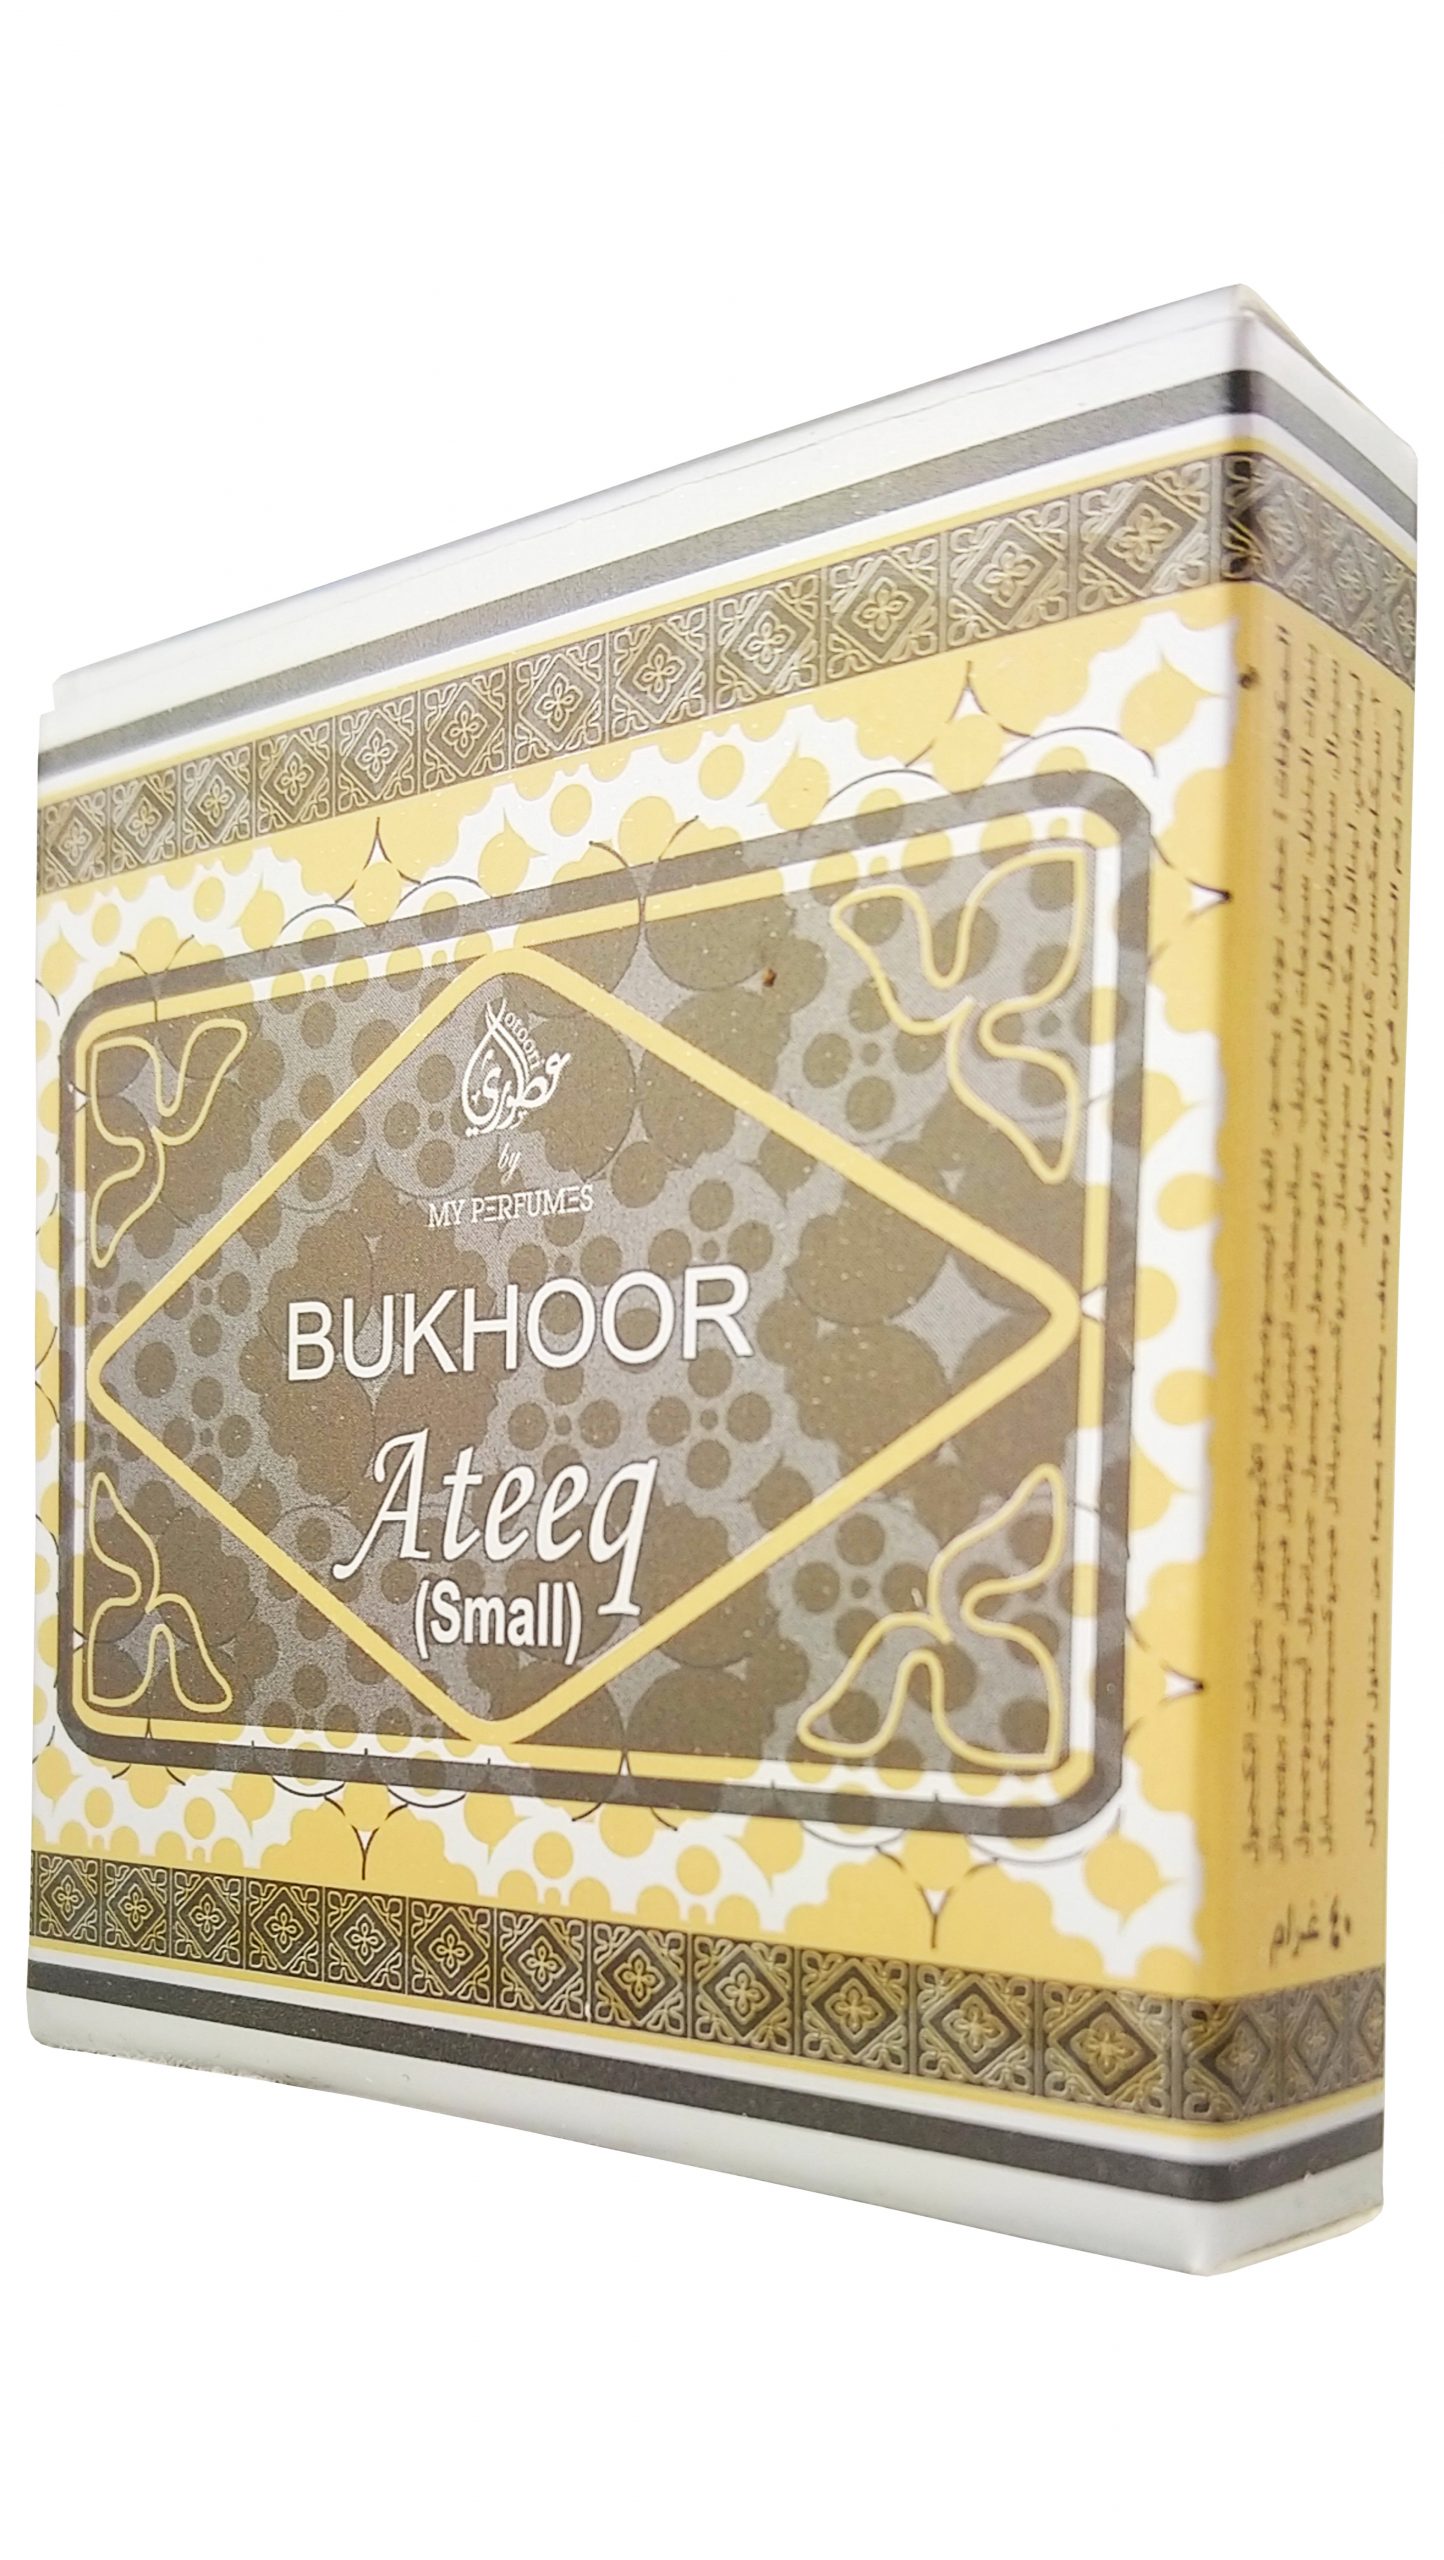 Bakhoor | Ateeq 40g by My Perfumes - E&A Distribution